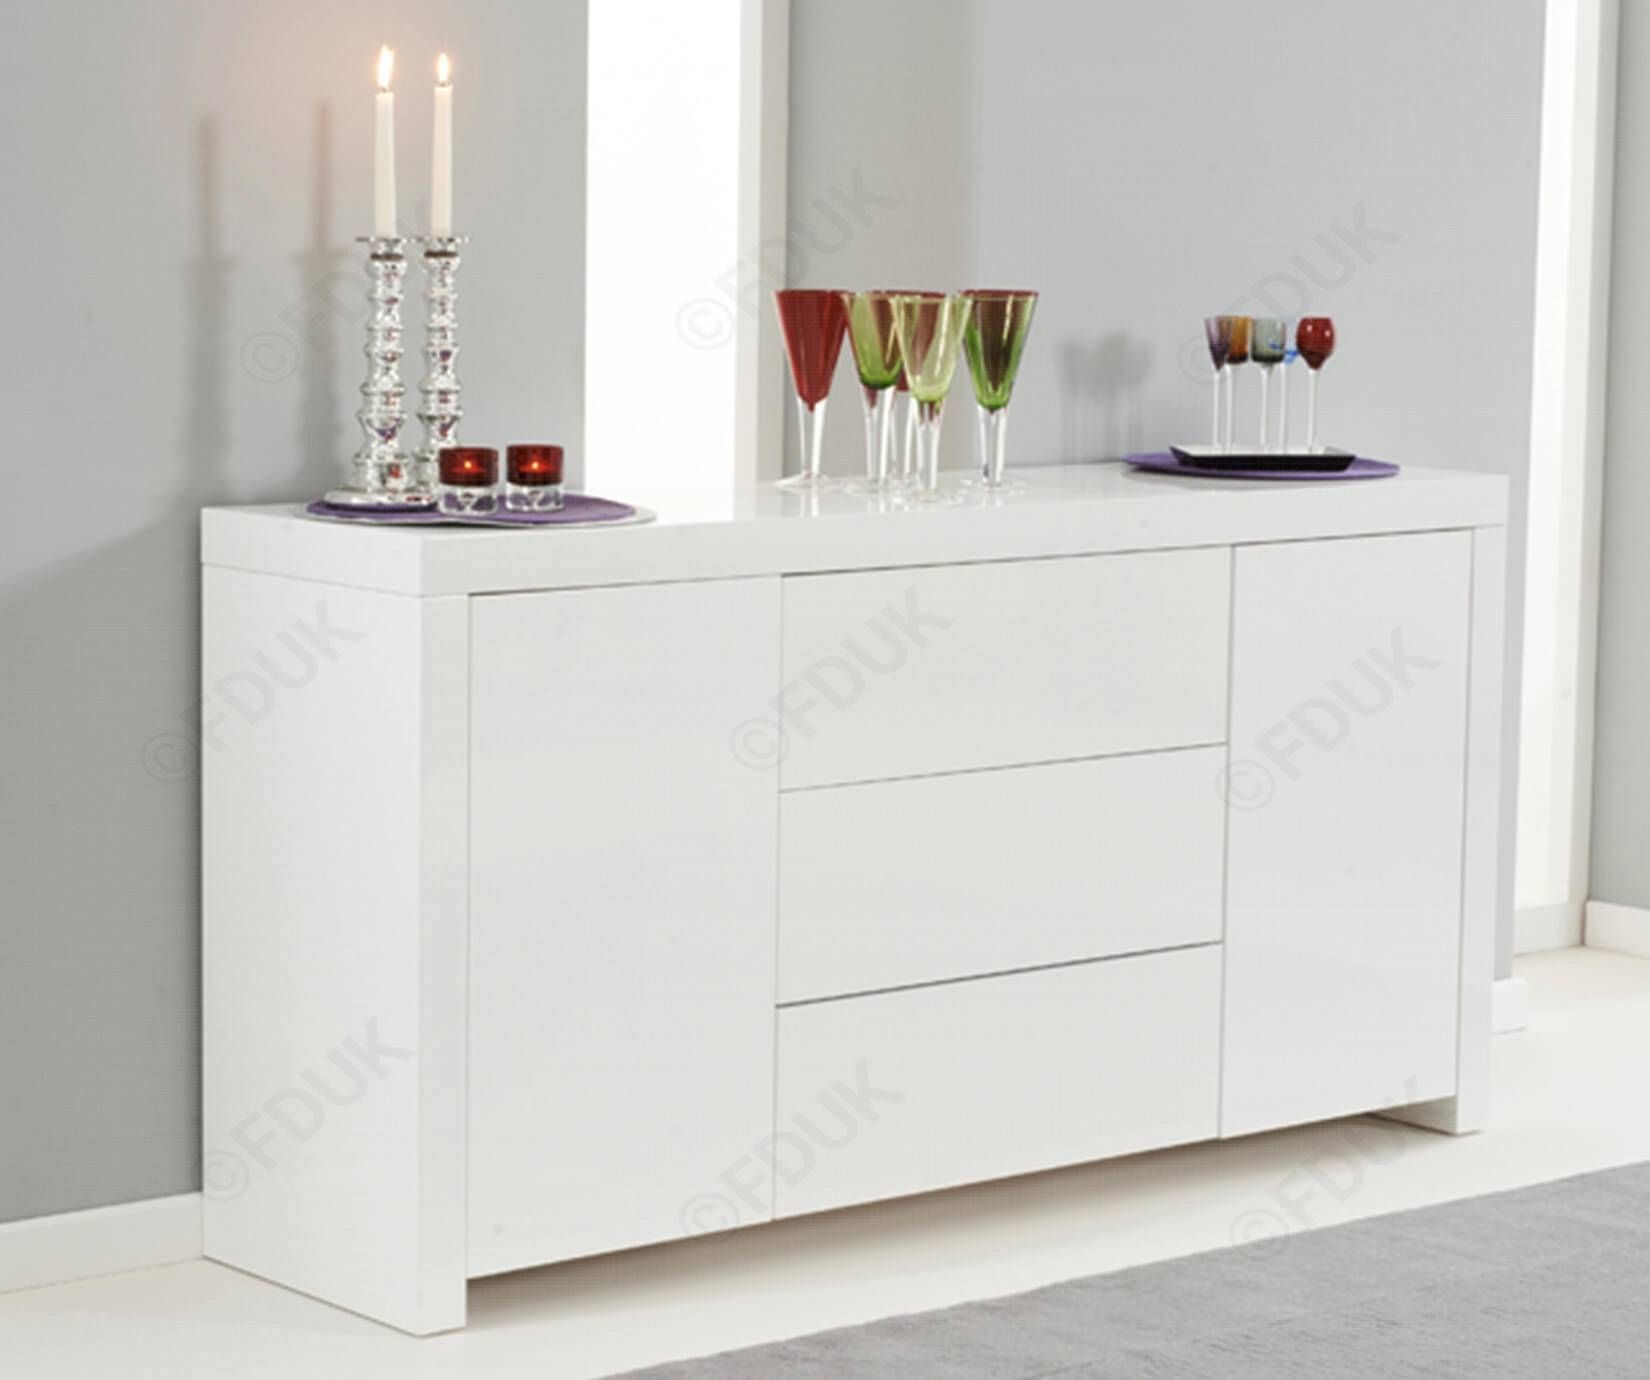 Mark Harris Hereford | Hereford White High Gloss Sideboard Intended For High Gloss Sideboards (View 4 of 20)